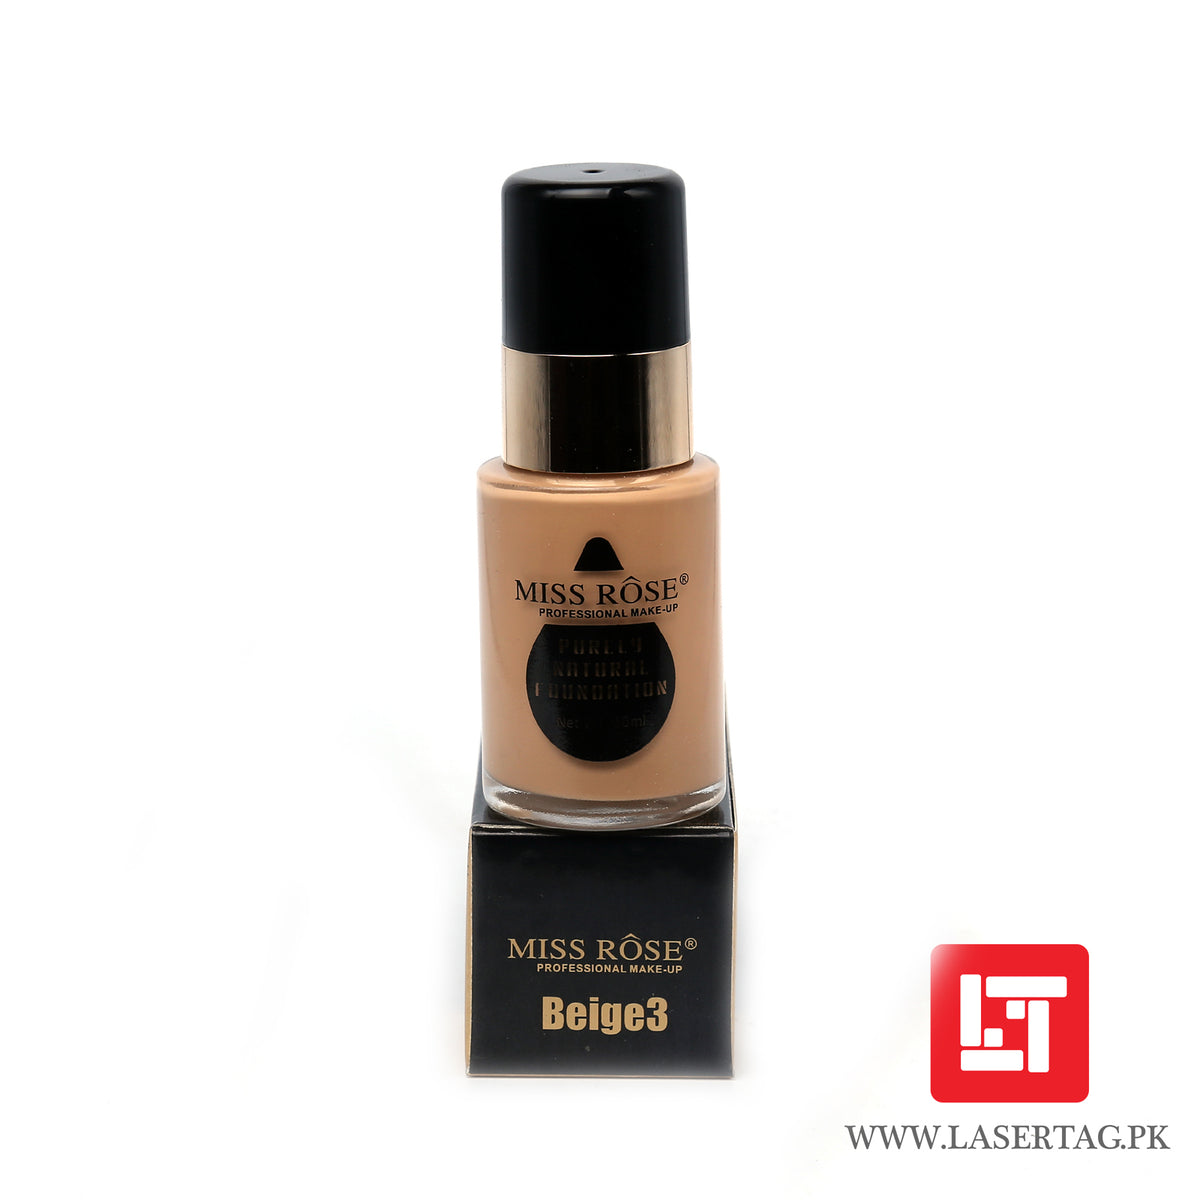 Miss Rose Purely Natural Foundation 30ml Beige 1 freeshipping - lasertag.pk